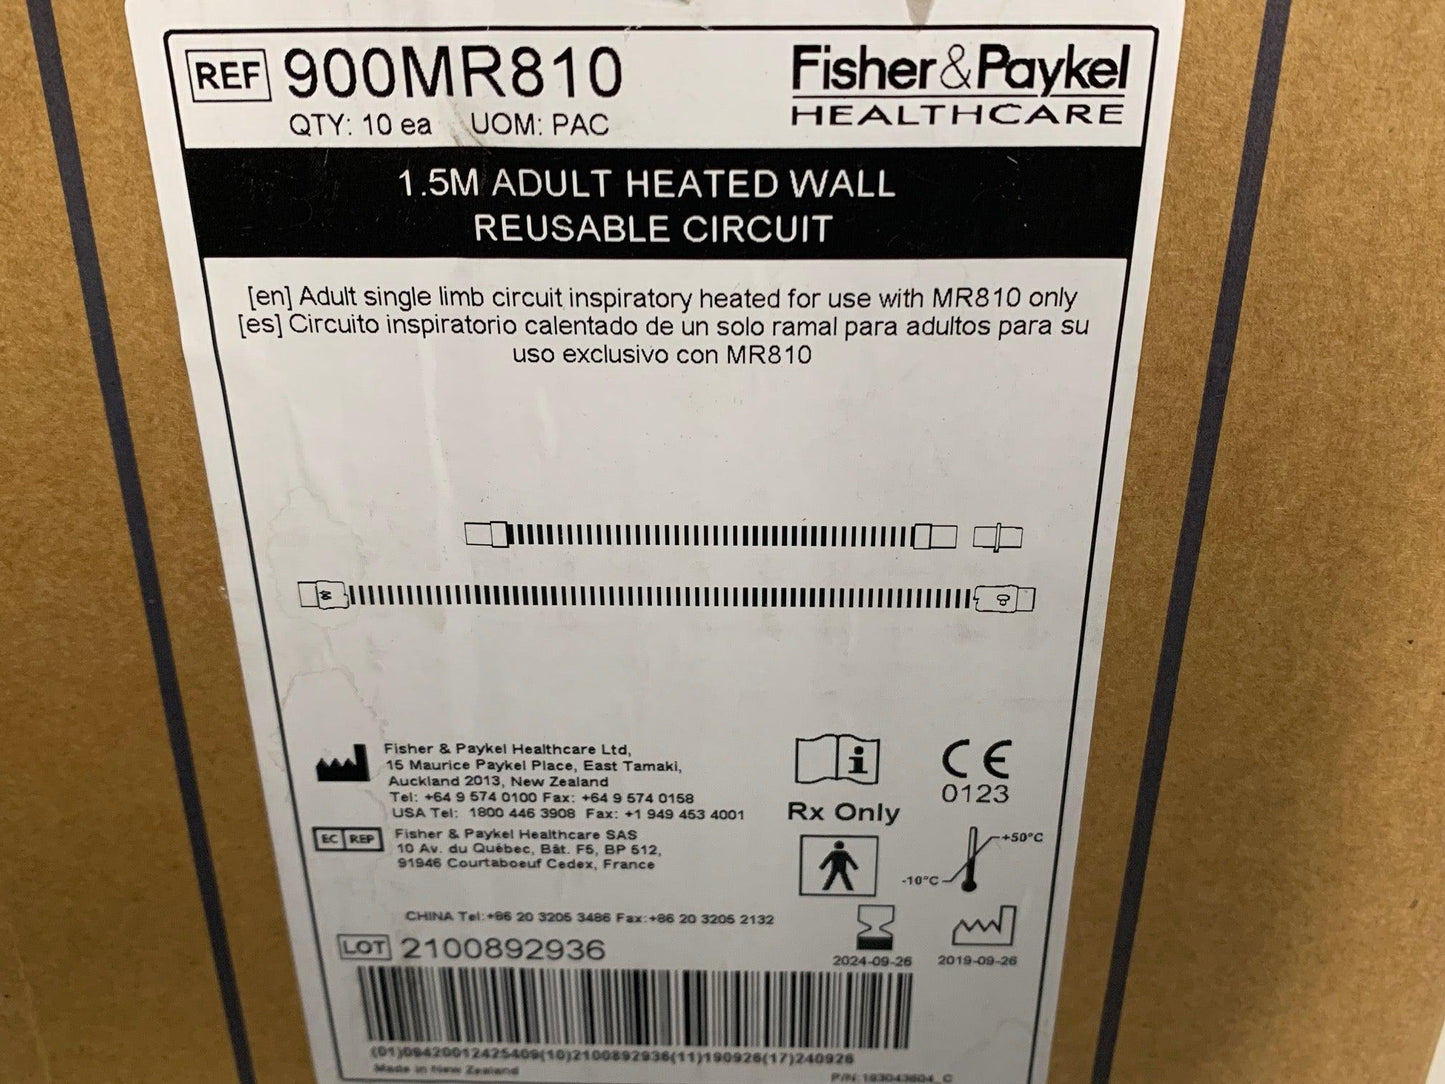 NEW 10PK Fisher & Paykel Evatherm 1.5M Single Limb Adult Heated Wall Reusable Patient Circuit 900MR810 - MBR Medicals